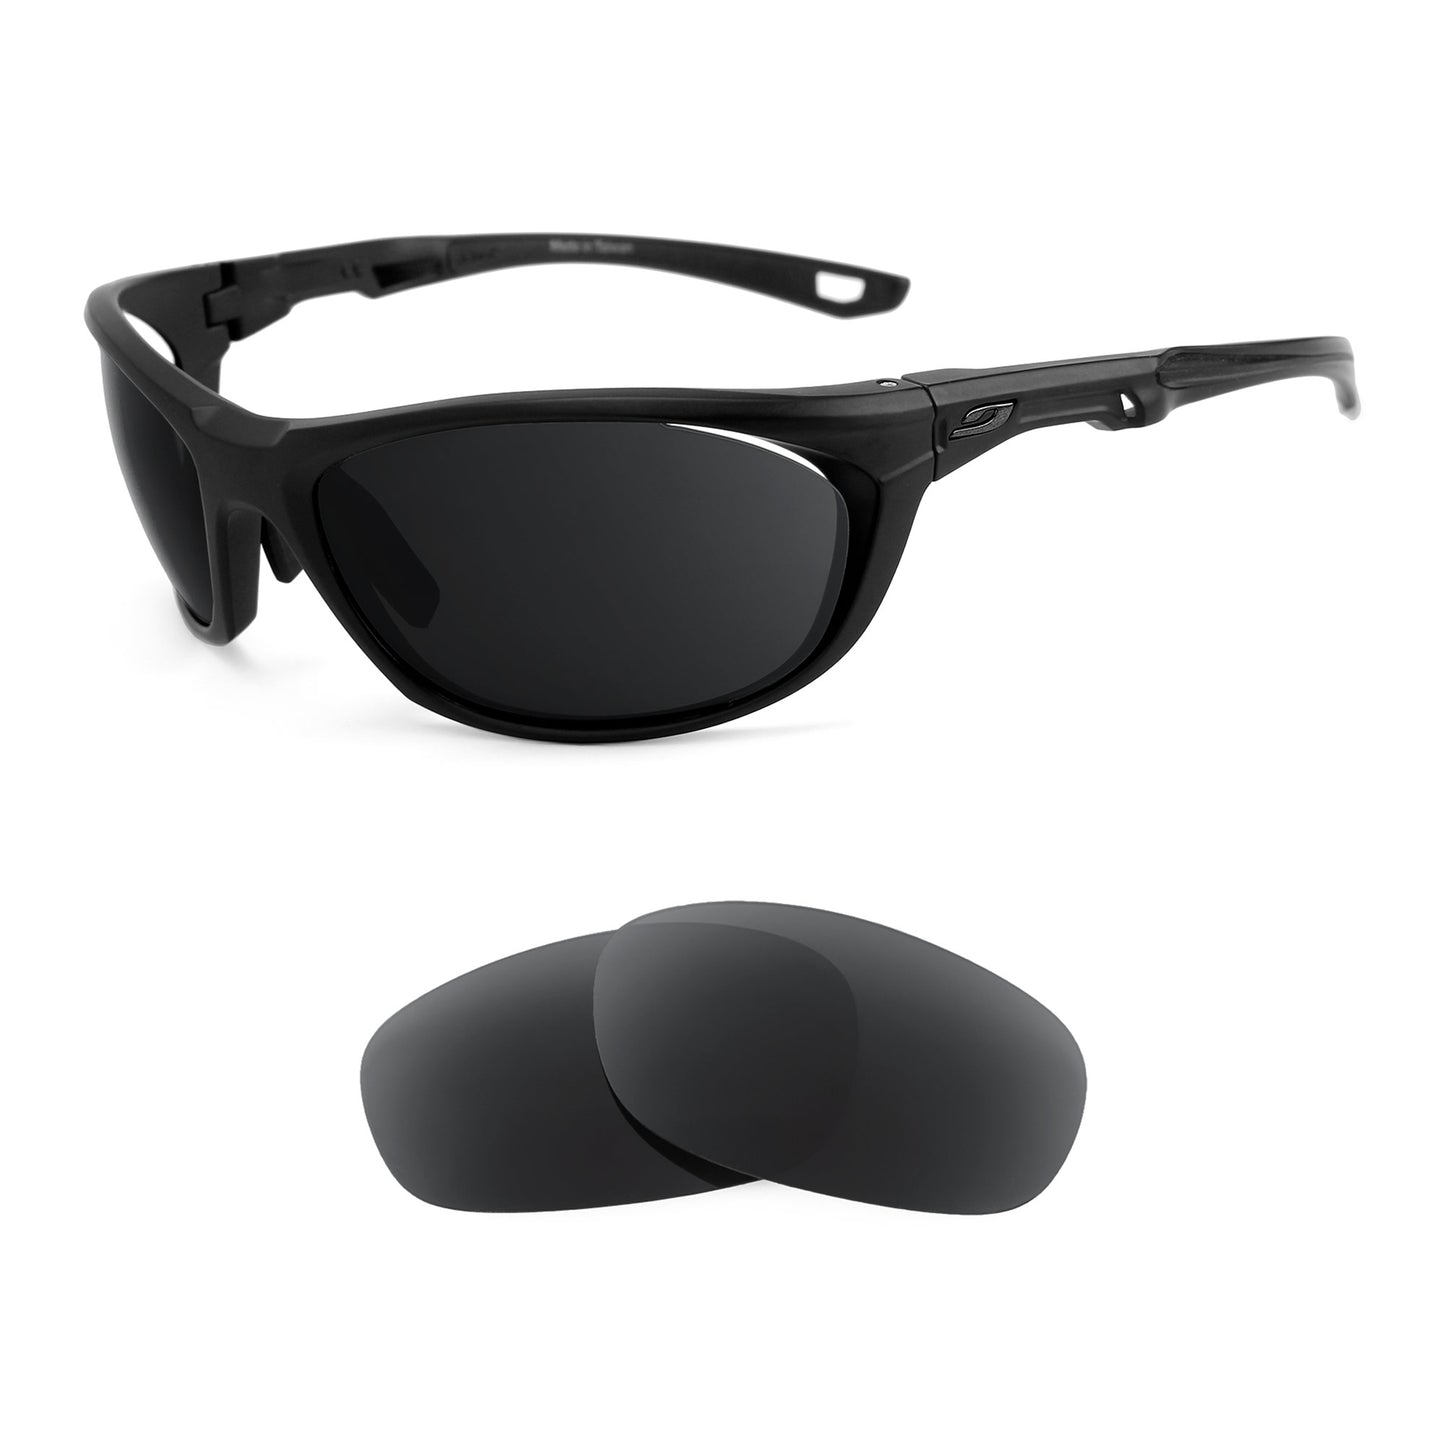 Julbo Race 2.0 sunglasses with replacement lenses